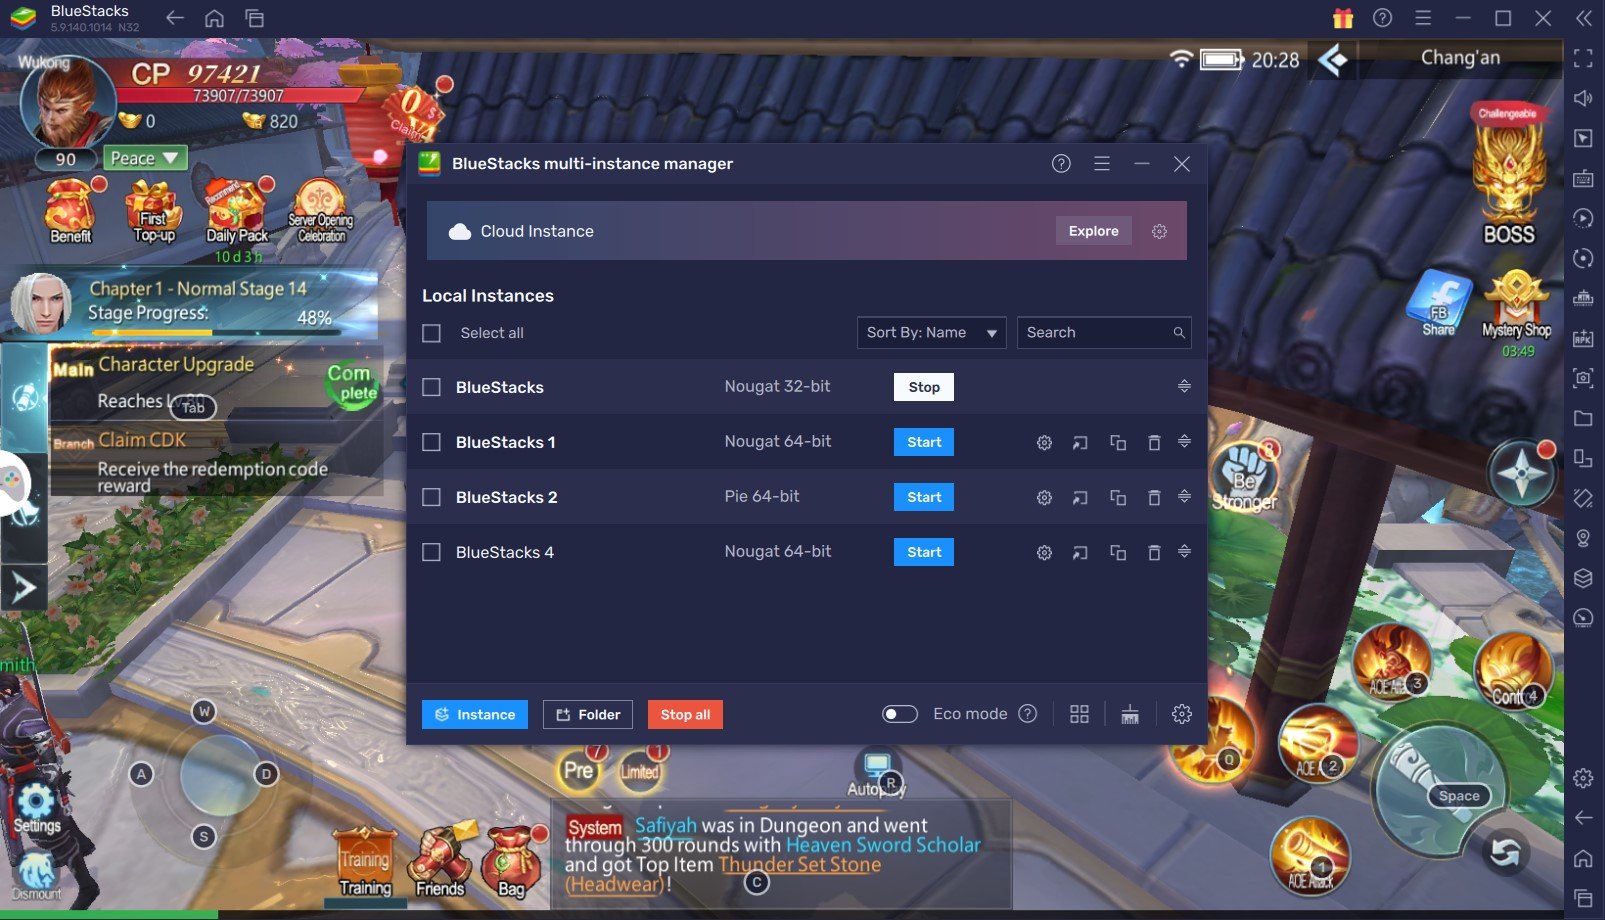 BlueStacks Features to Save Time and Increase Efficiency in Divine W: Perfect Wonderland